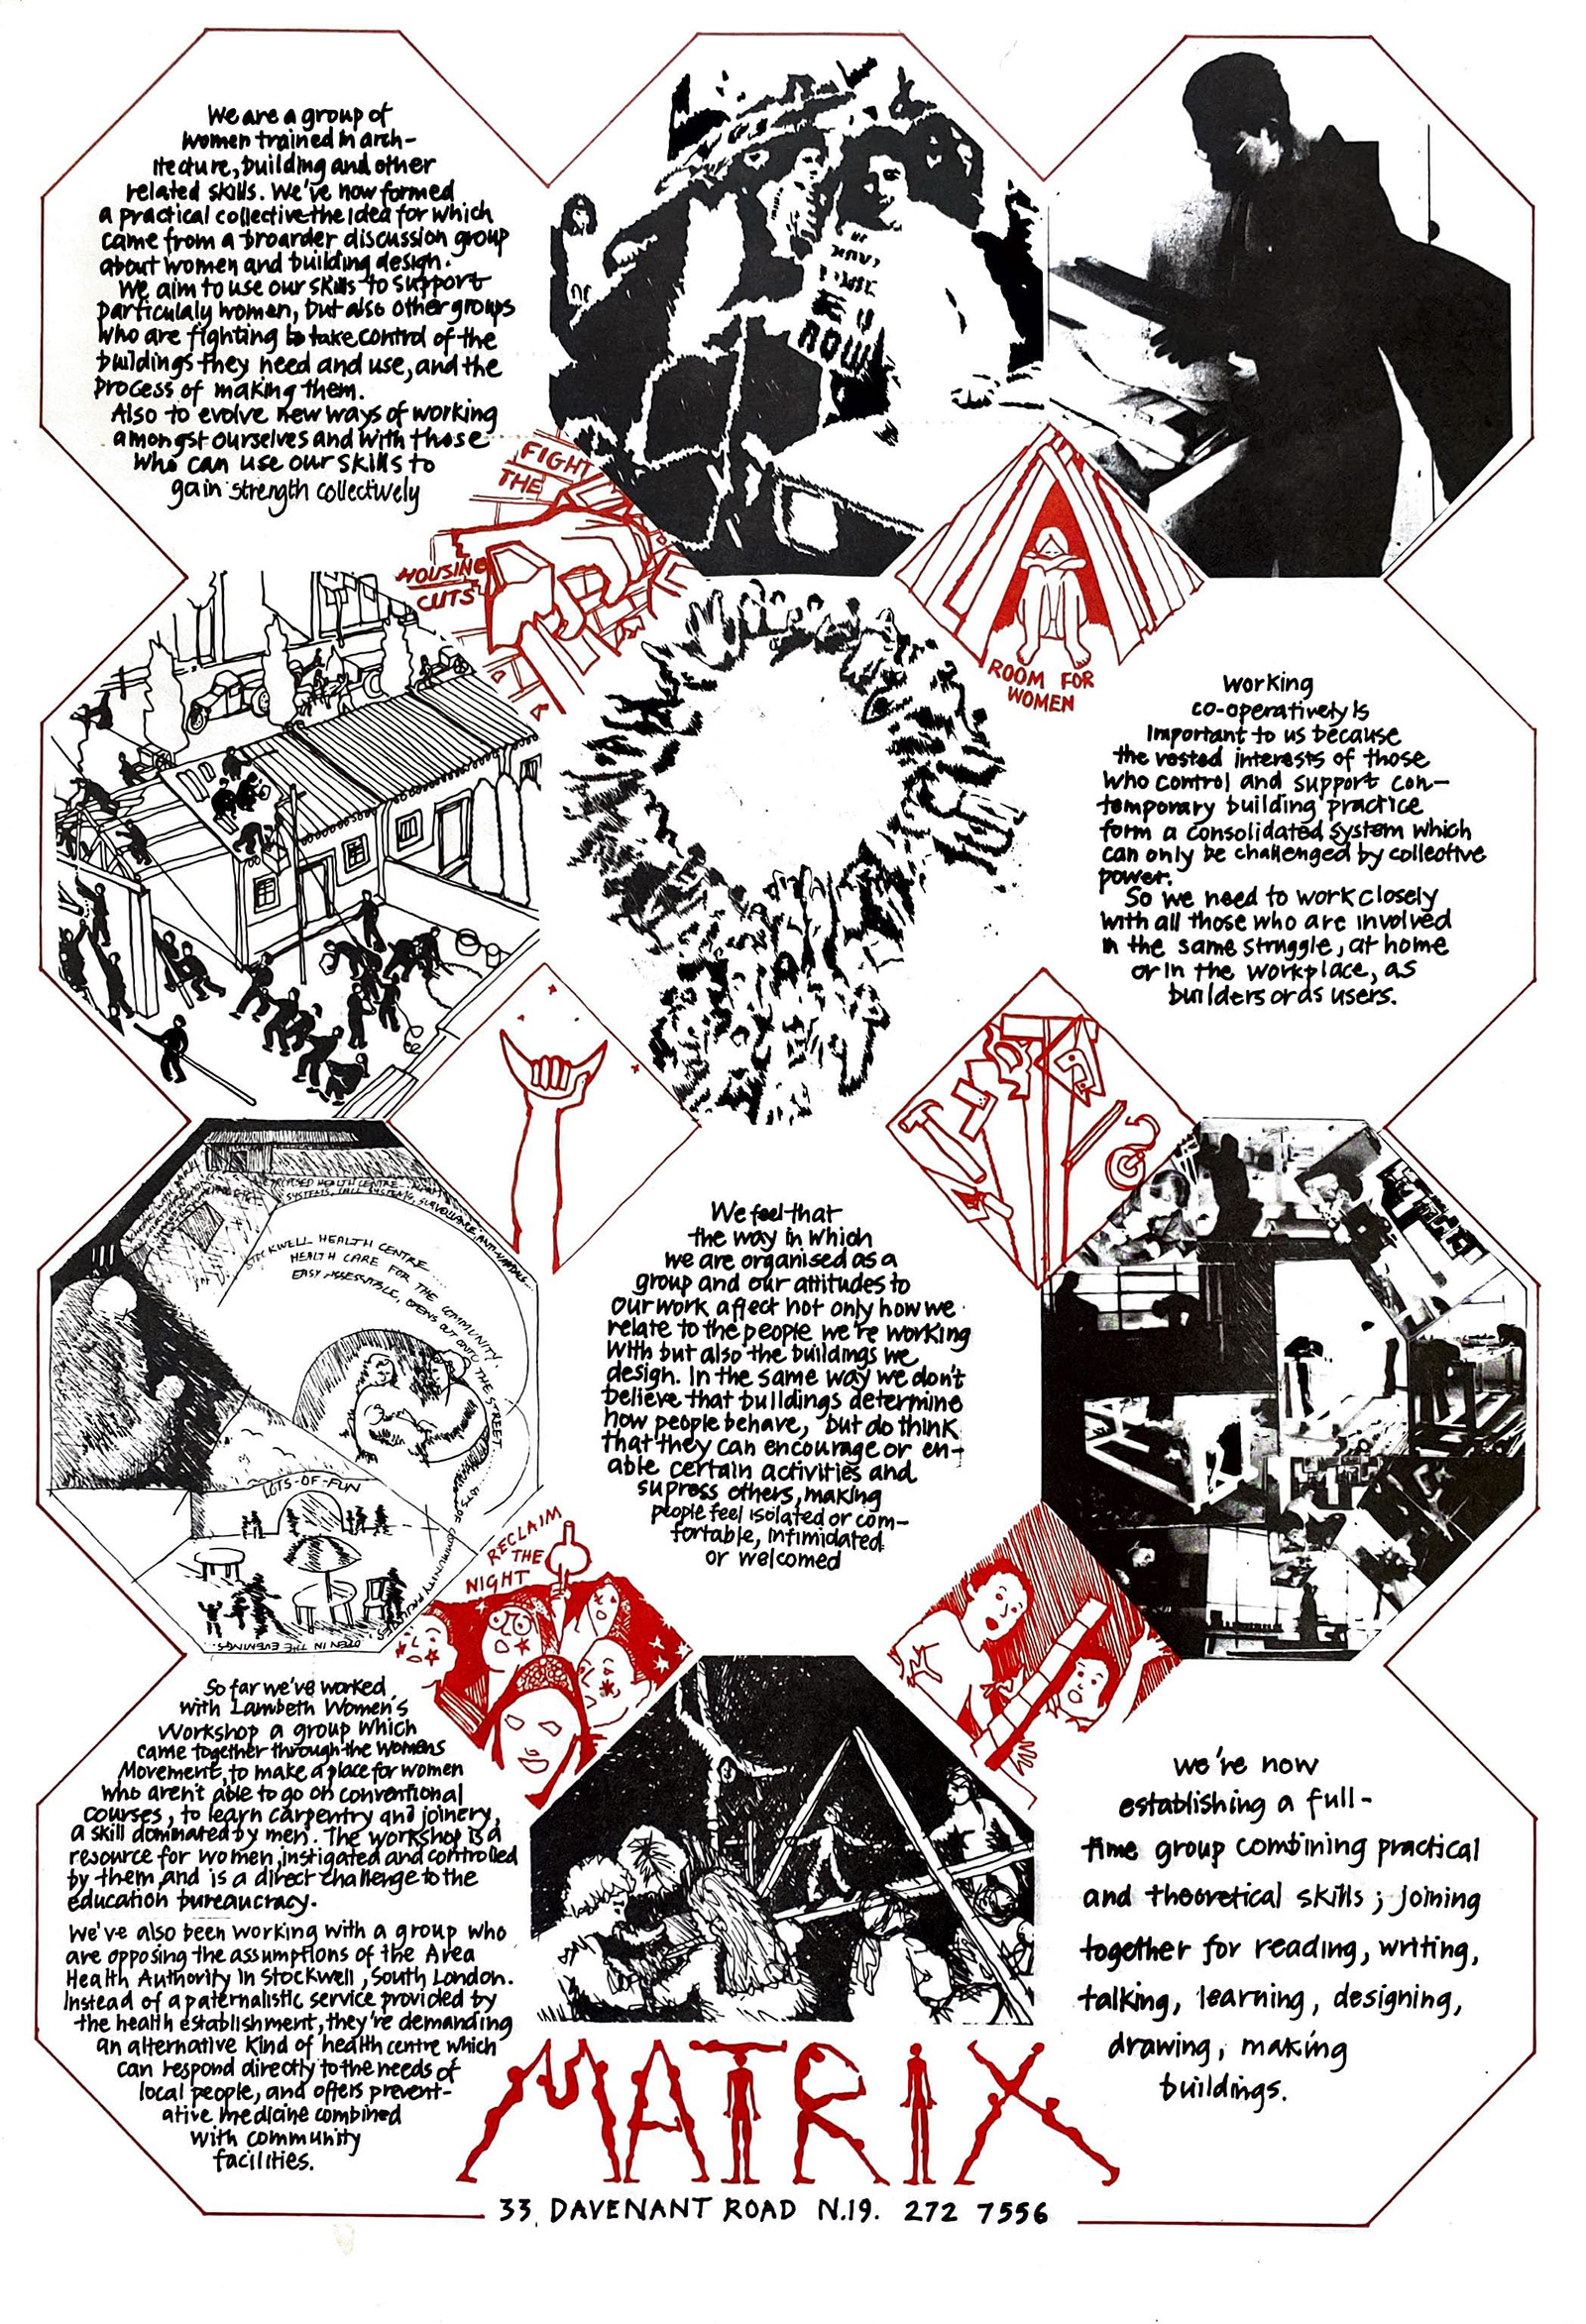 A promotional poster for Matrix, printed in black and red ink. It's composed of a grid of hexagons, some containing images, some with handwritten text and some with illustrations.